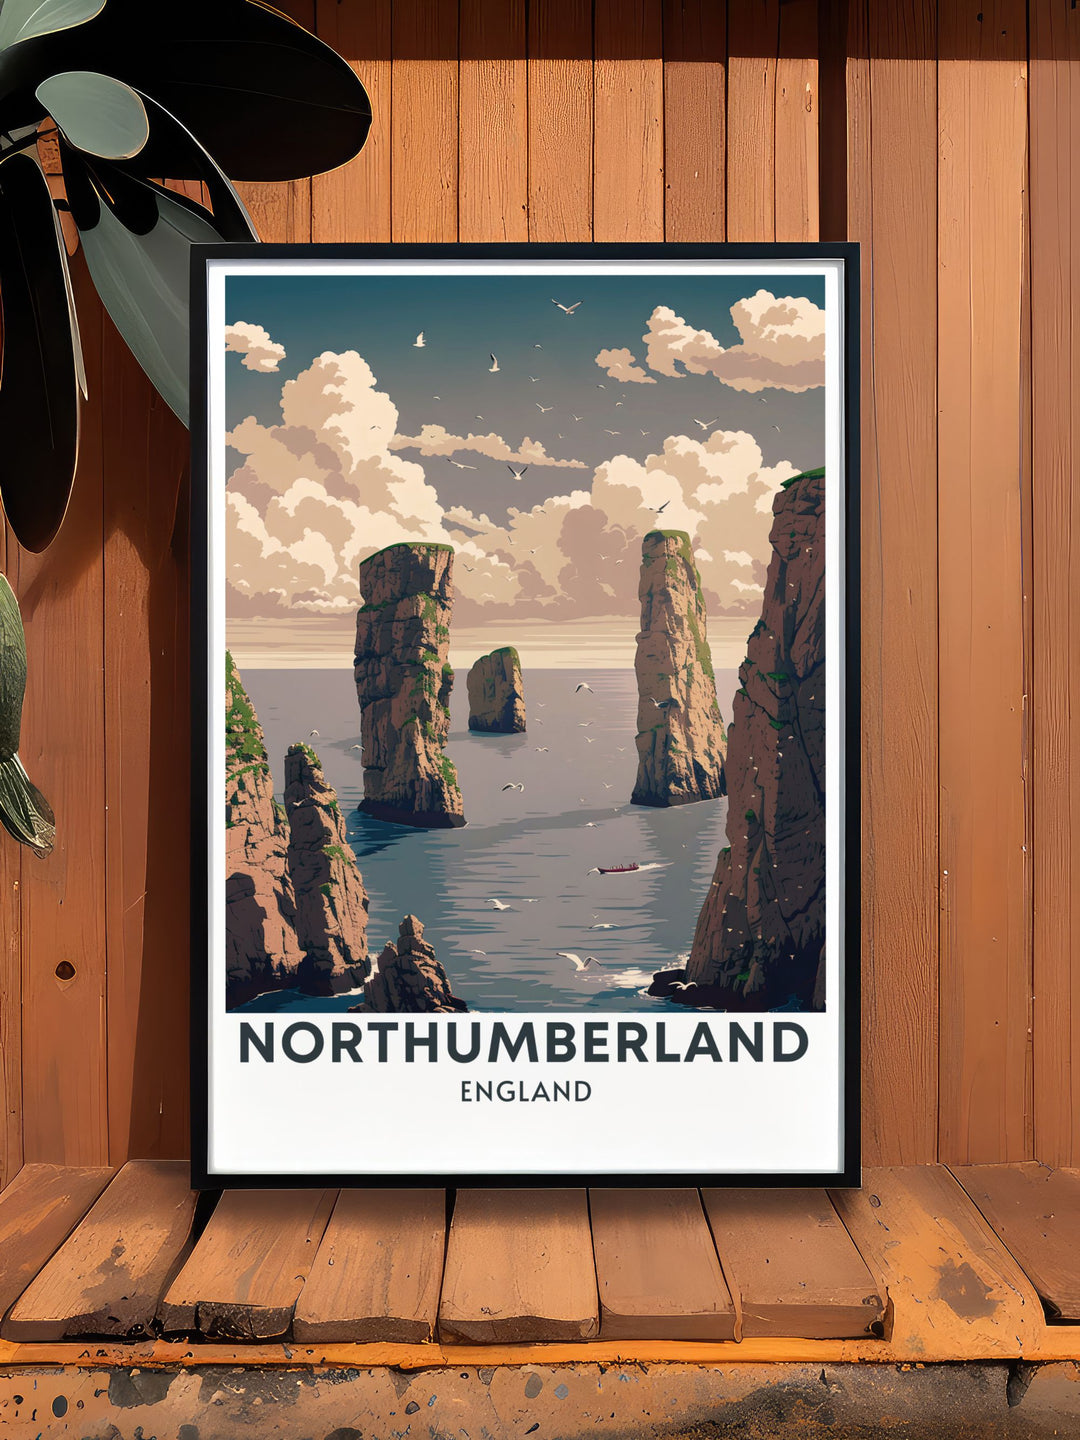 Retro travel poster featuring Seahouses and the Farne Islands. This detailed artwork is perfect for those who appreciate vintage travel prints and want to bring a piece of Northumberlands natural charm into their home.